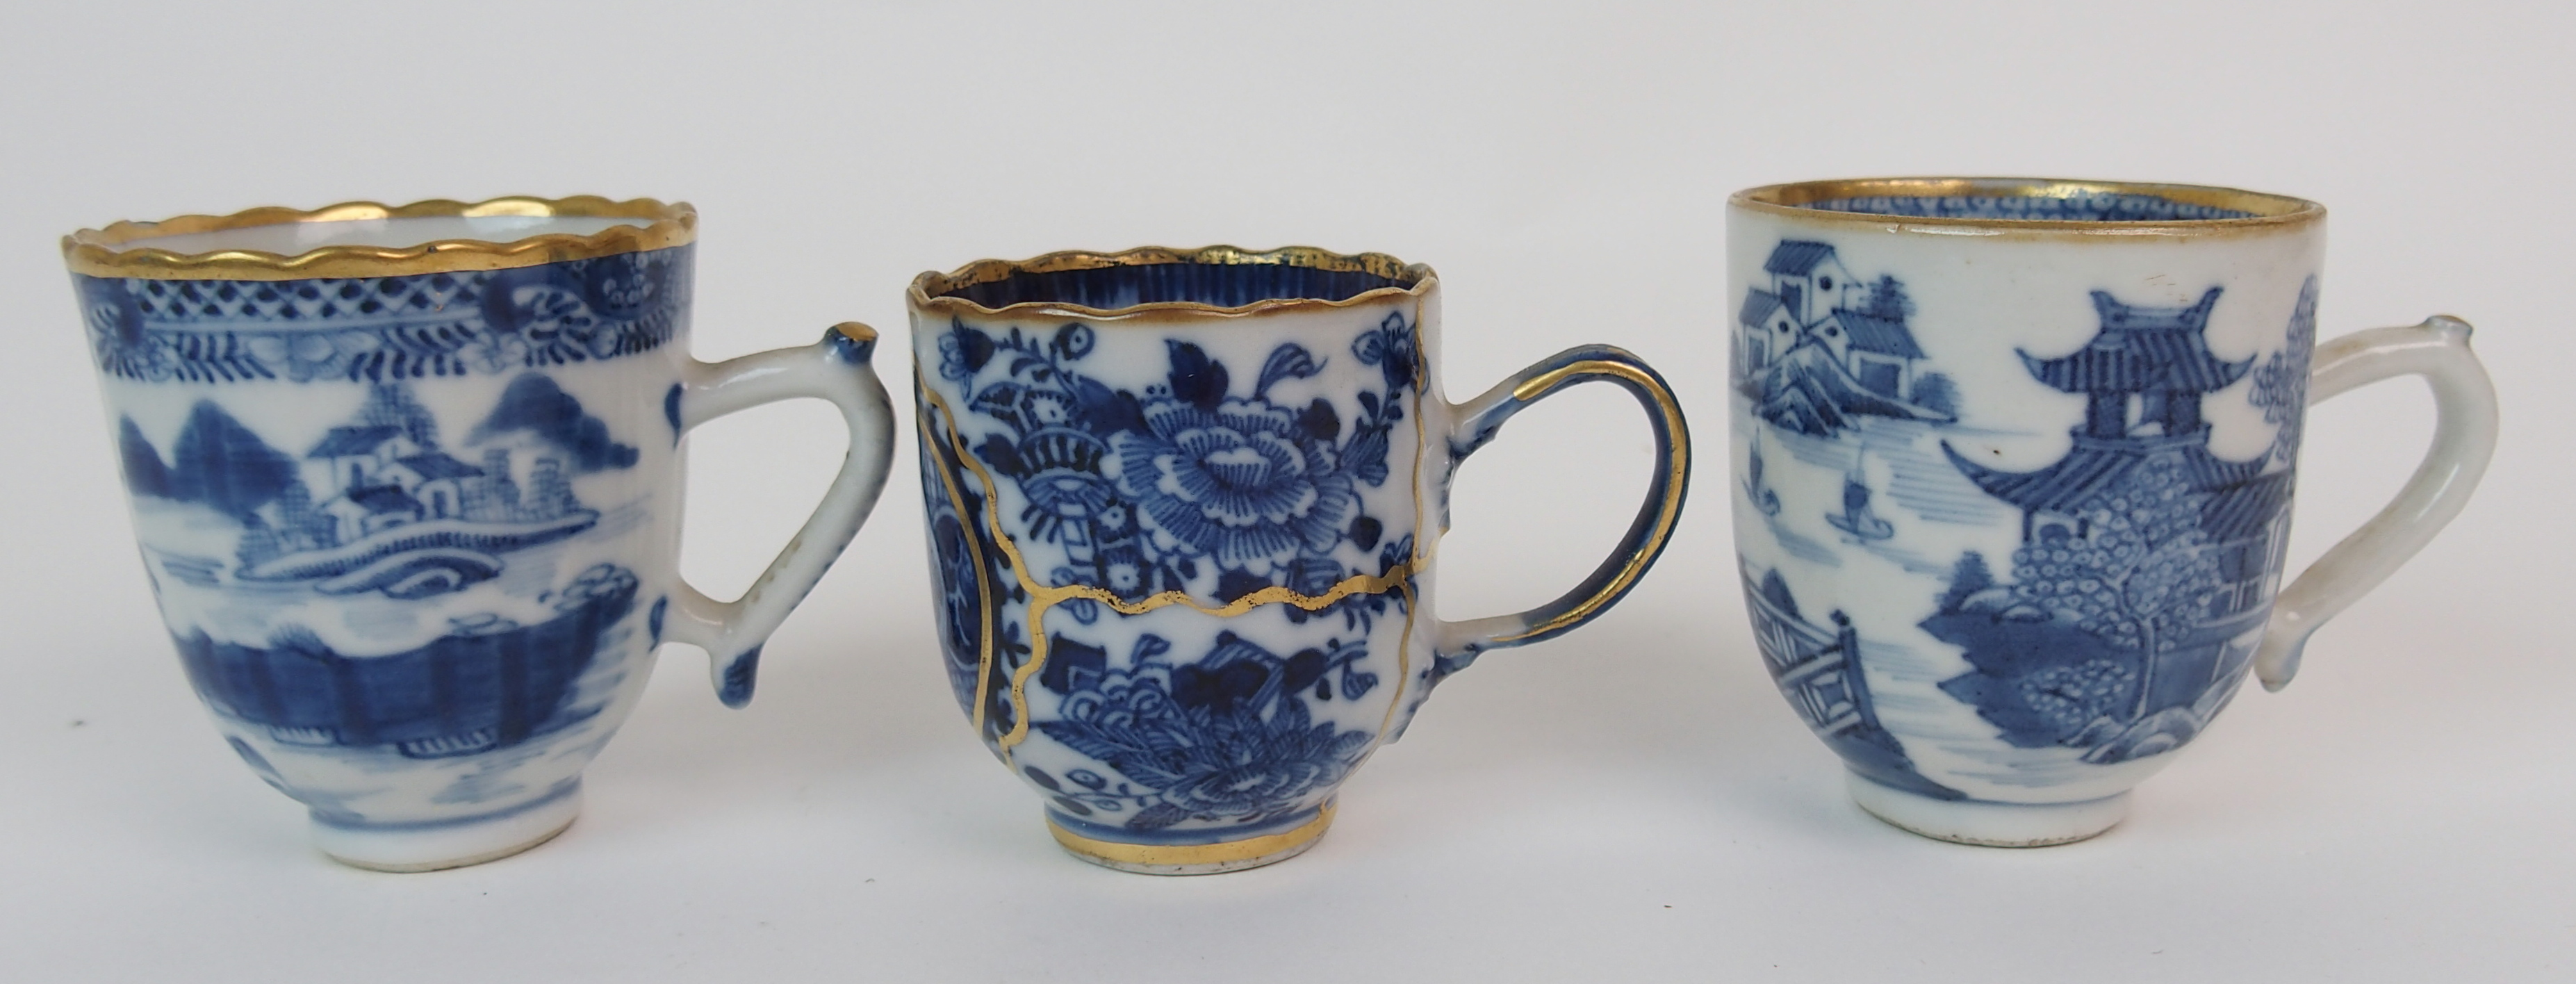 A group of twenty-three Chinese export teacups painted with typical landscapes and gilt rims, - Image 4 of 10